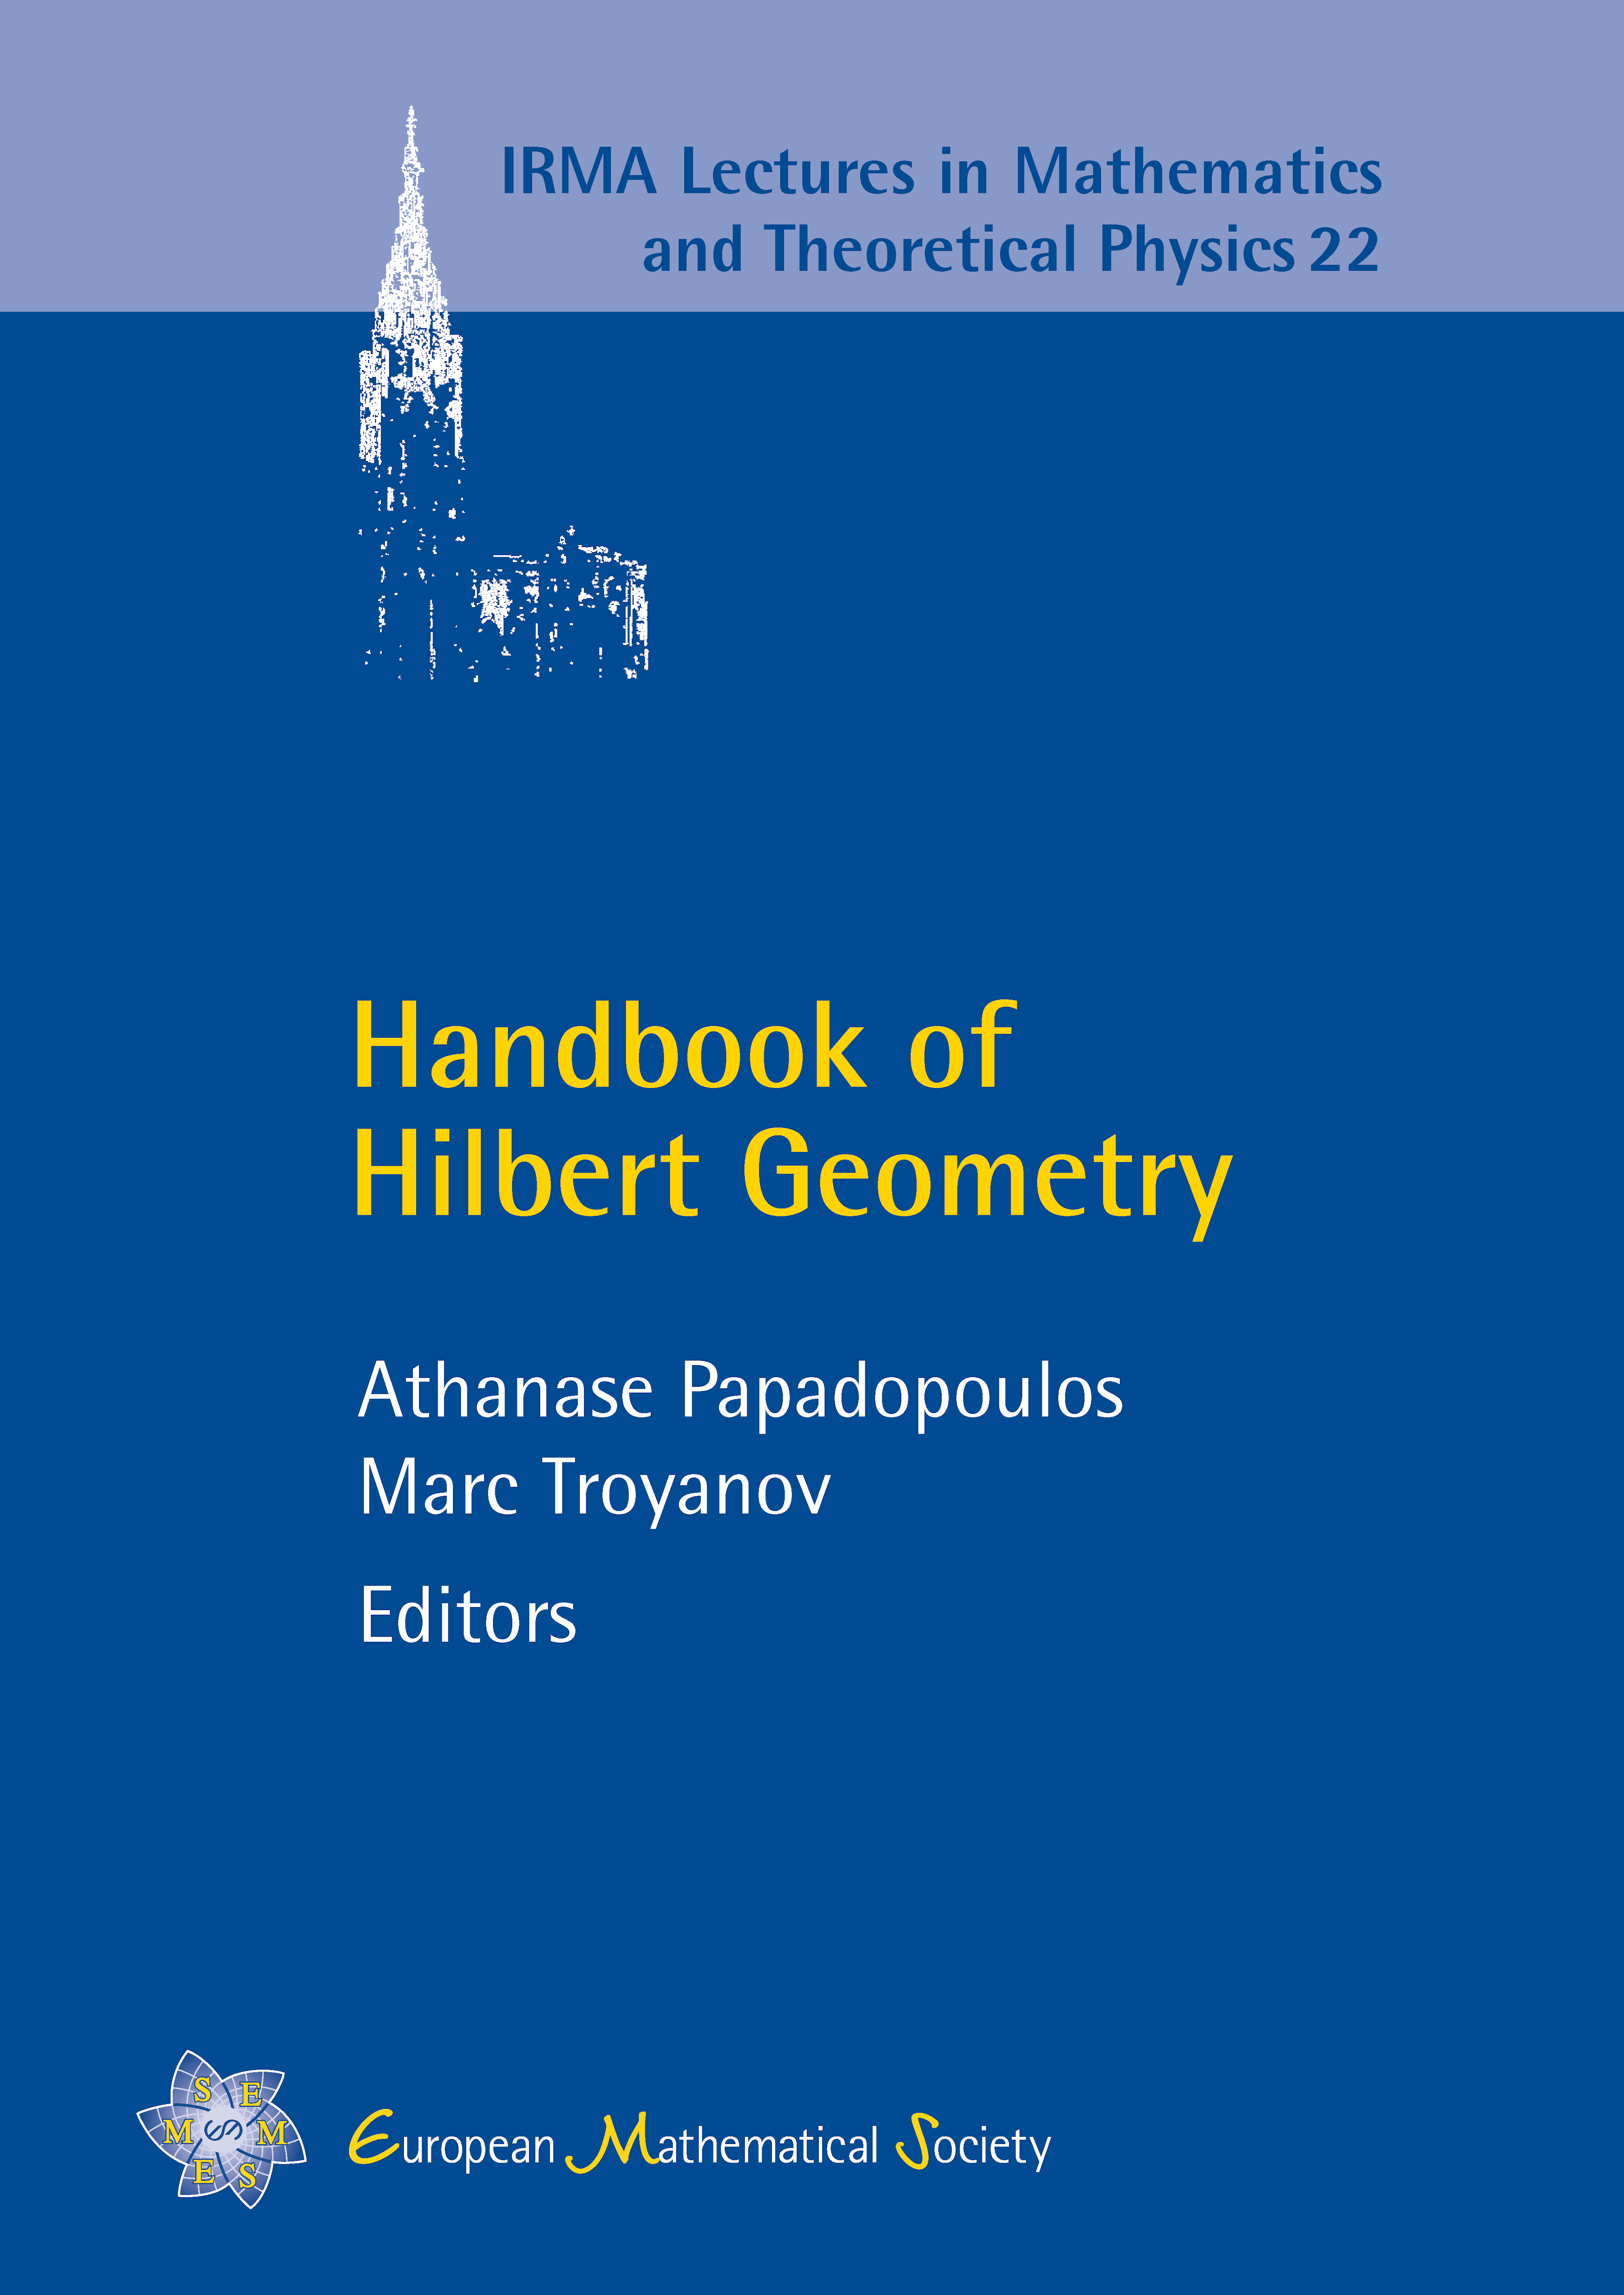 Funk and Hilbert geometries in spaces of constant curvature cover